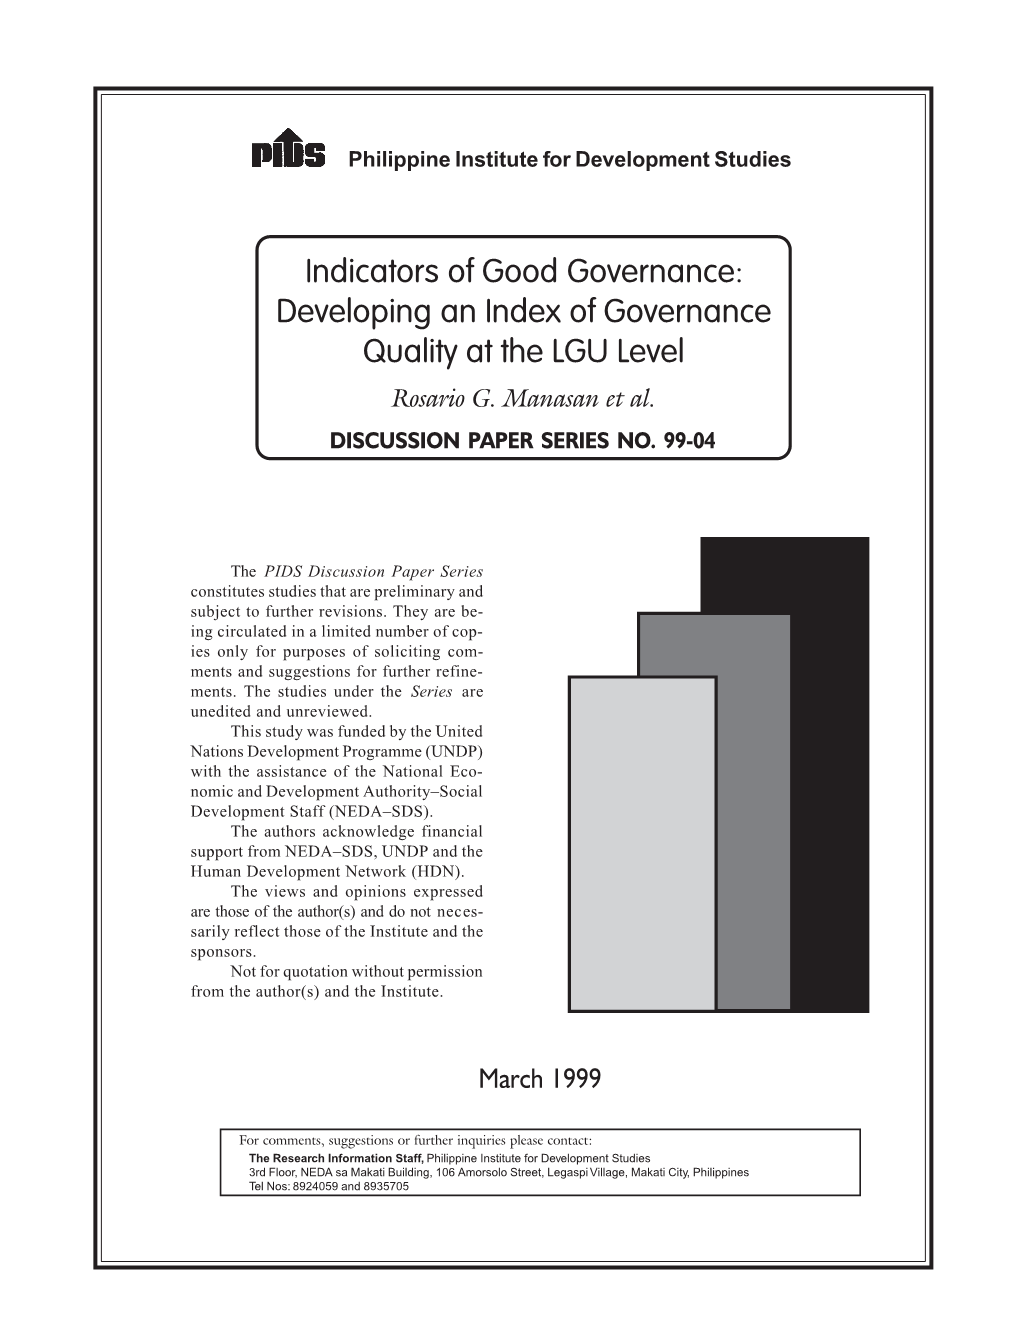 Indicators of Good Governance: Developing an Index of Governance Quality at the LGU Level Rosario G